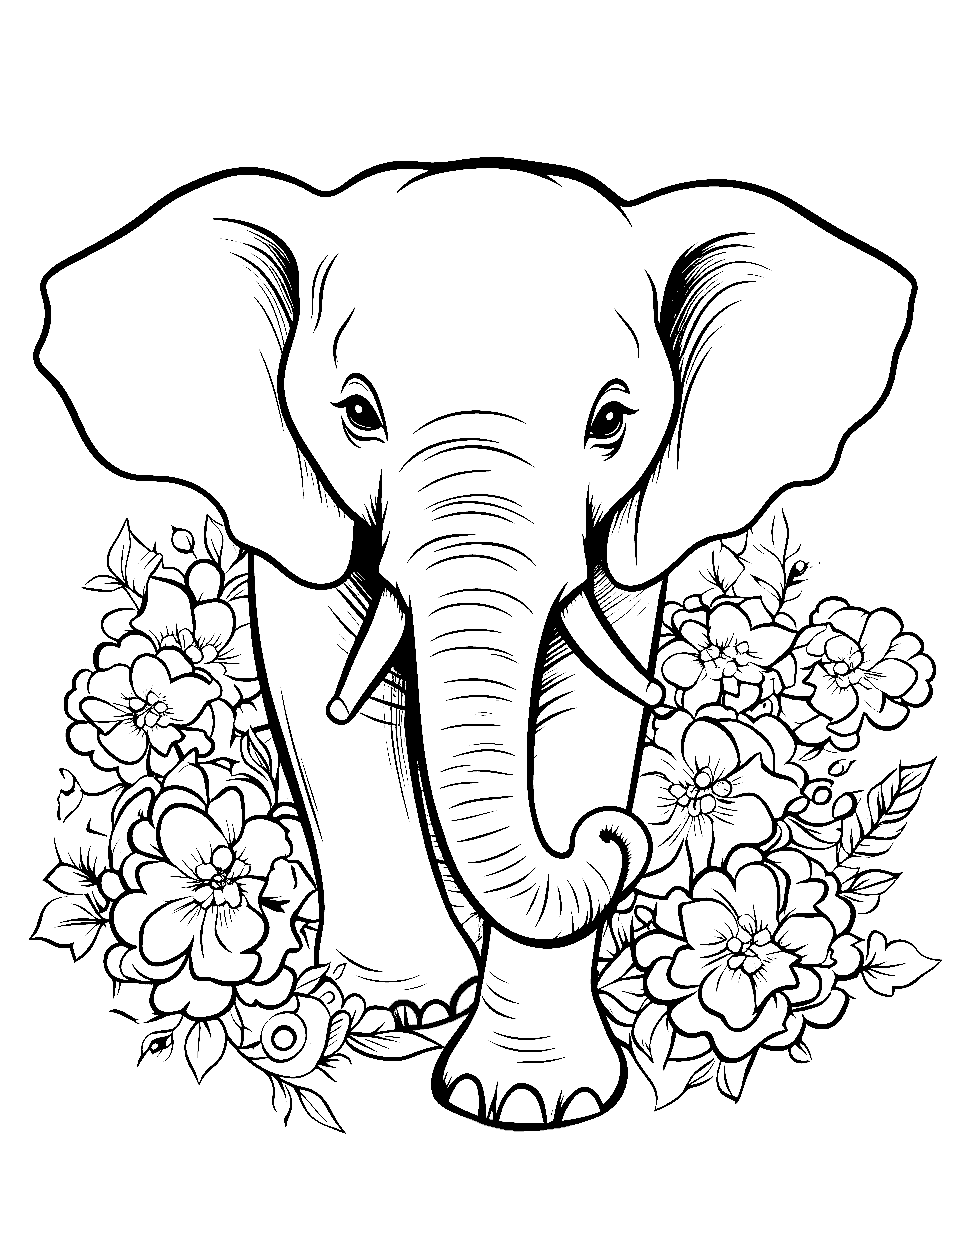 Free Elephant Coloring Pages for Adults - Easy Peasy and Fun